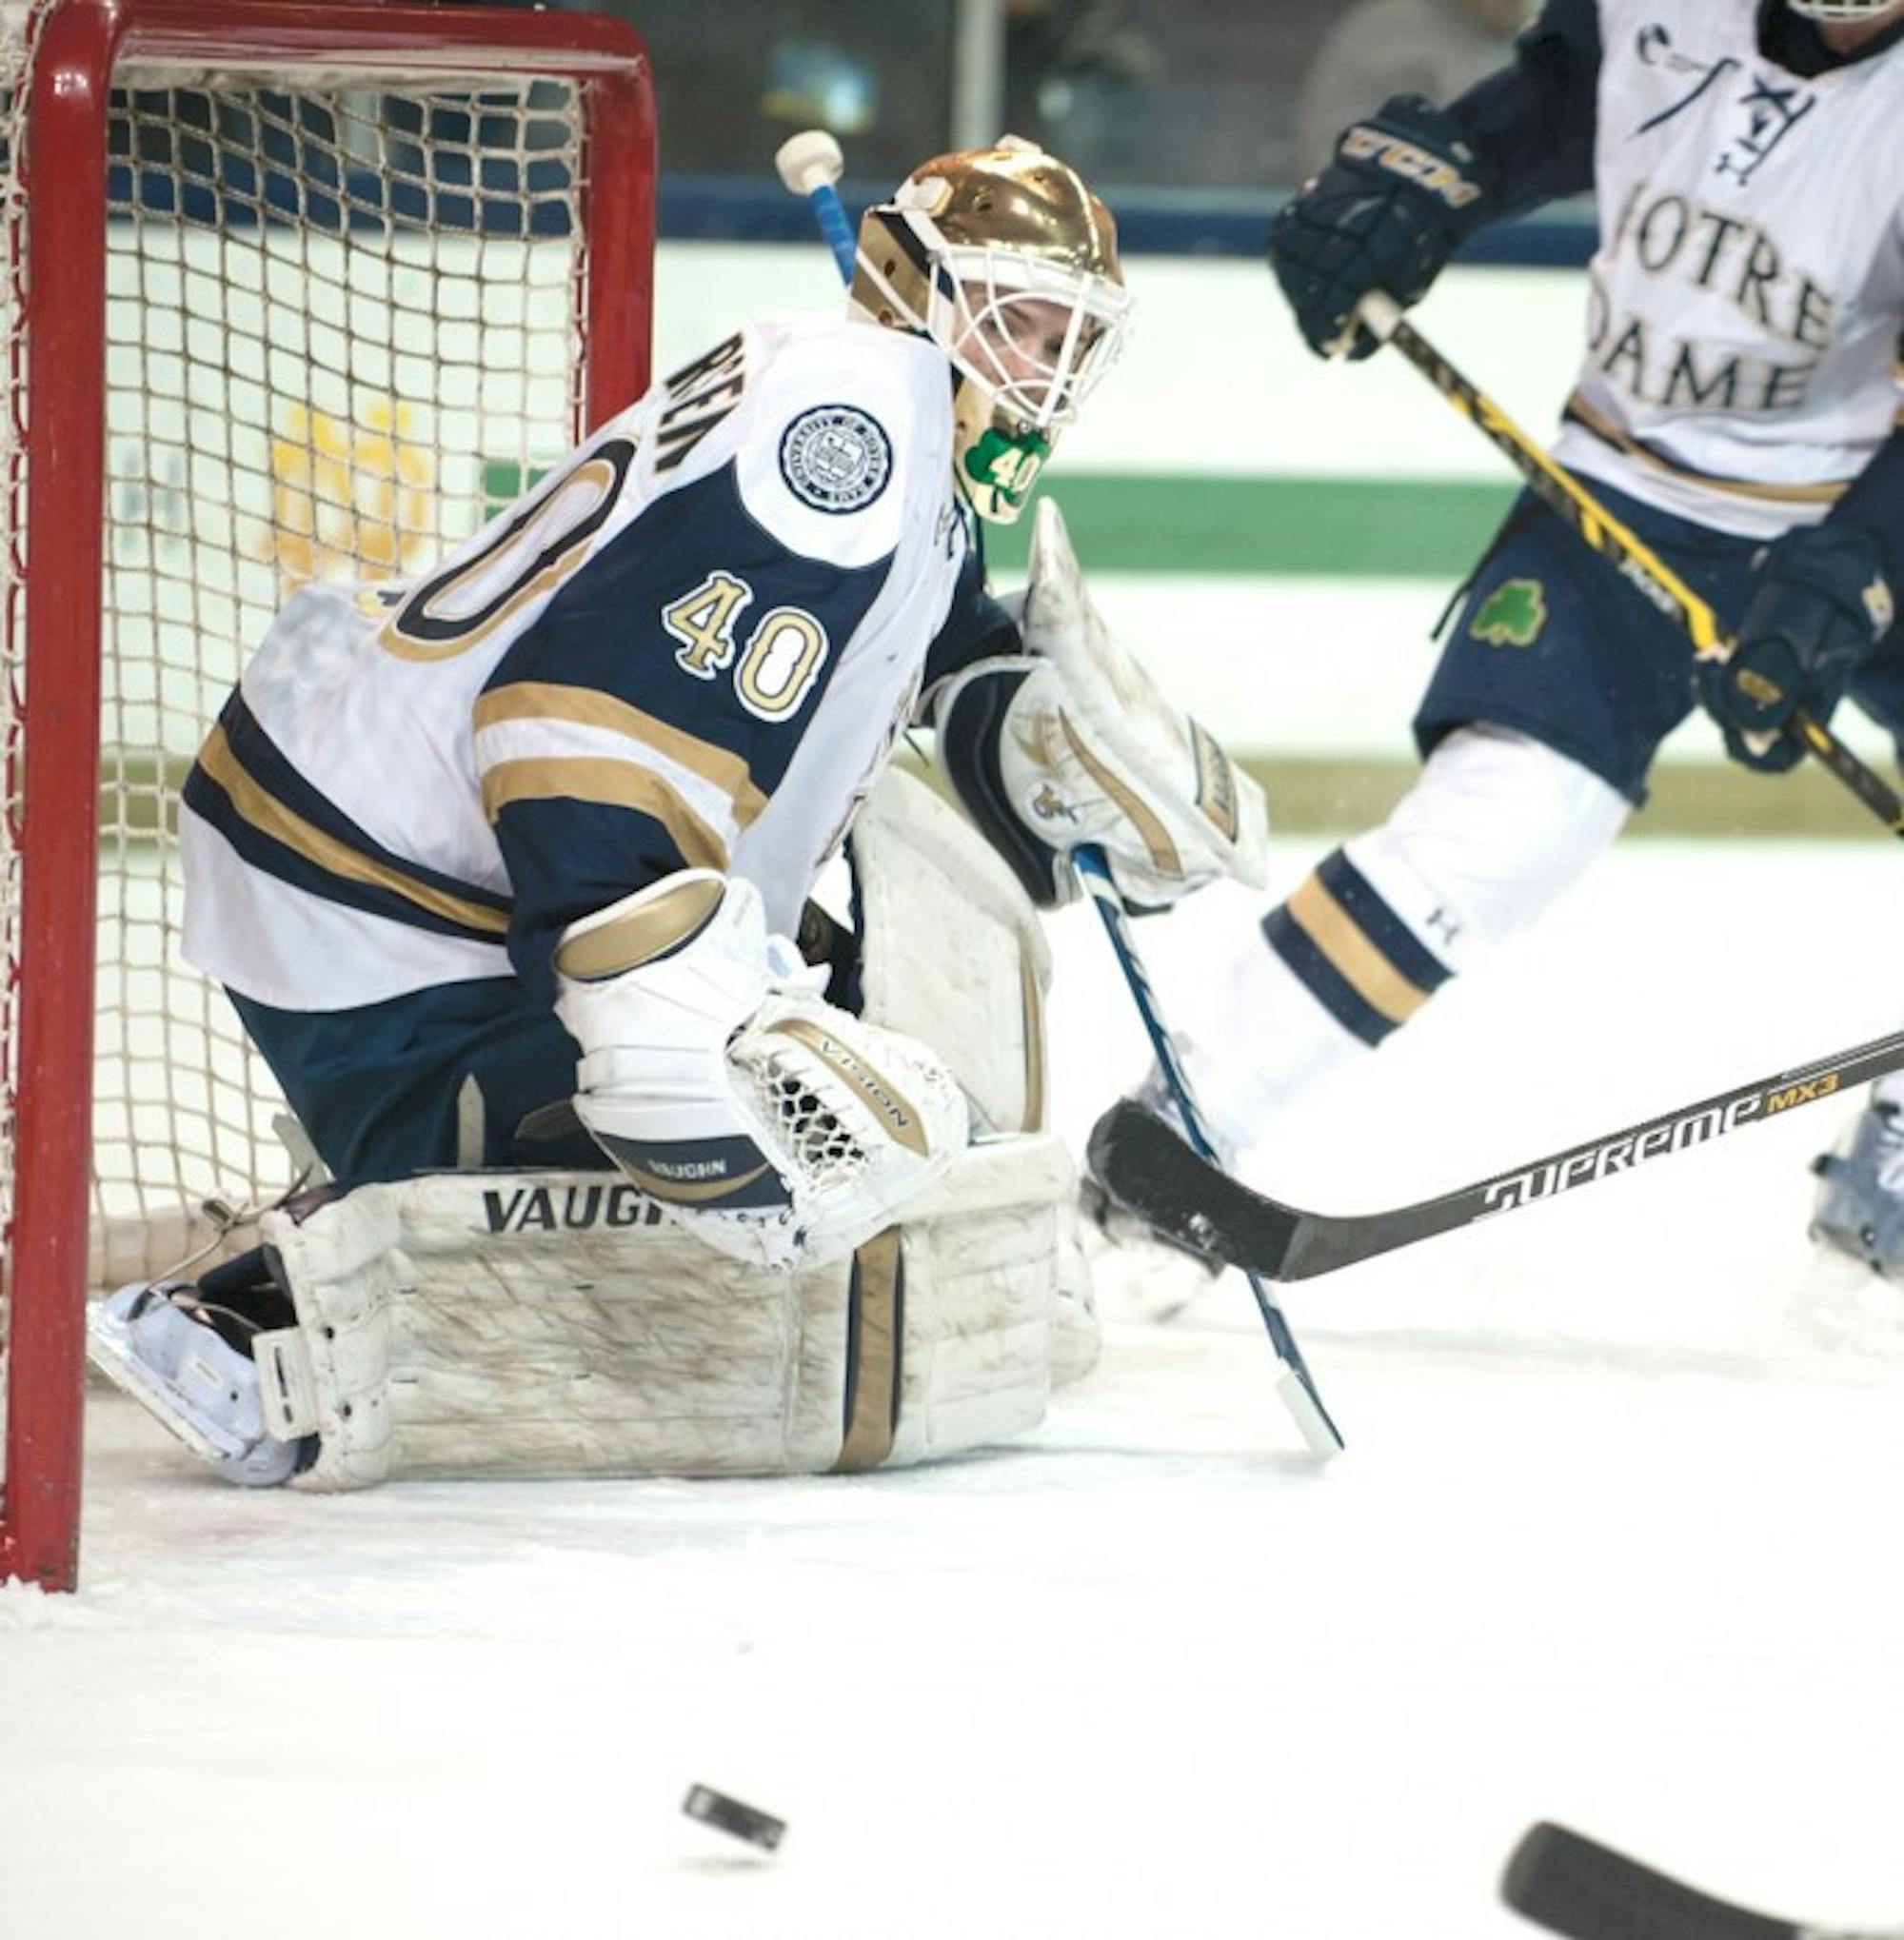 Irish freshman goaltender Cal Petersen watches a puck sail by in Notre Dame’s 5-2 loss to New Hampshire on Jan. 30.